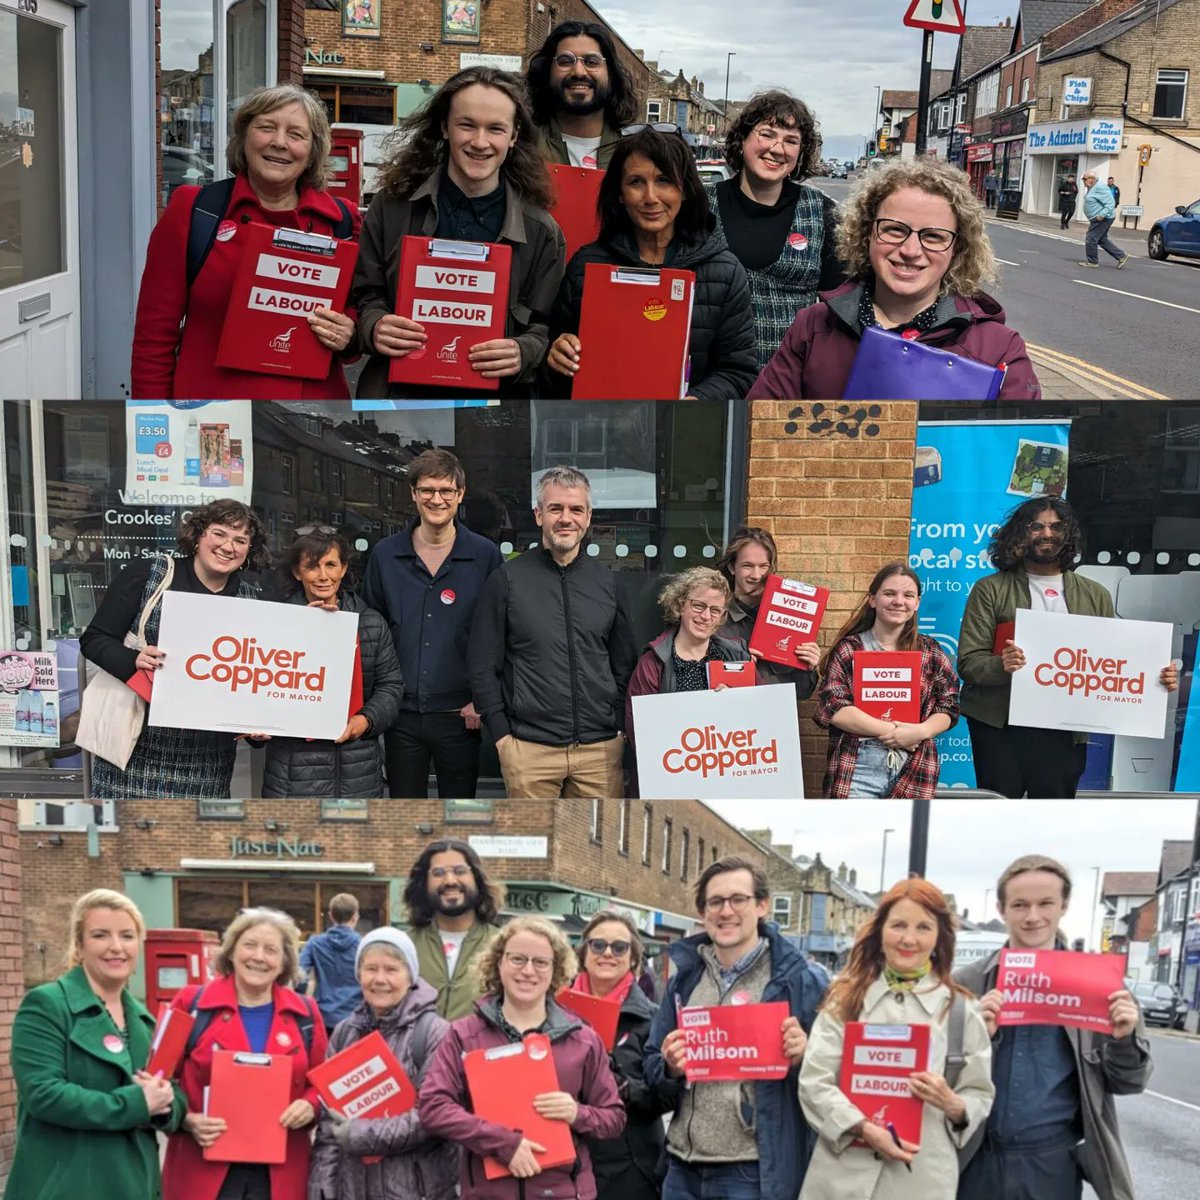 Wonderful weekend with a fab team out in Crookes and Crosspool. Lots of support for Labour and our fantastic councillor Ruth Milsom! @LouHaigh @min_esh @olivercoppard @RuthMilsom @JaynePDunn #LabourDoorstep